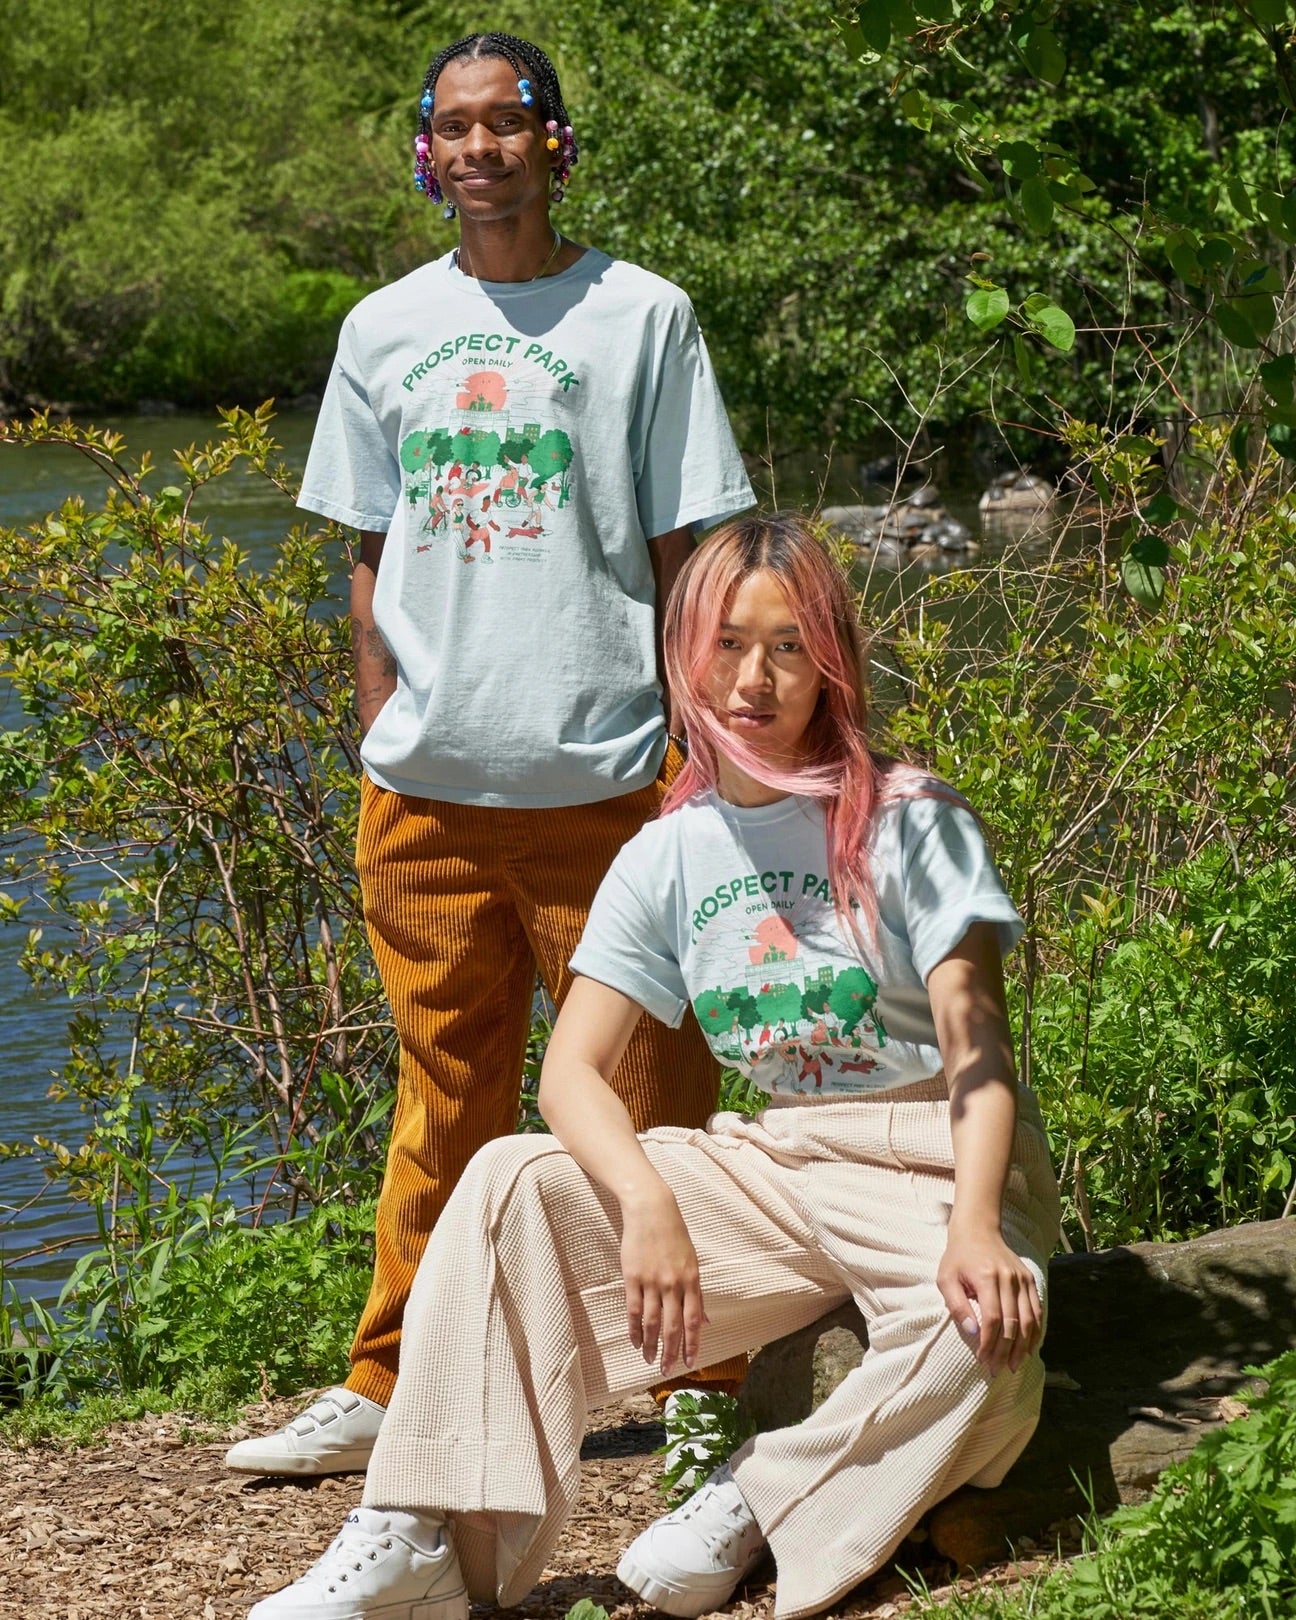 PARKS PROJECT PROSPECT PARK ALLIANCE x PARKS PROJECT Open Daily Tee